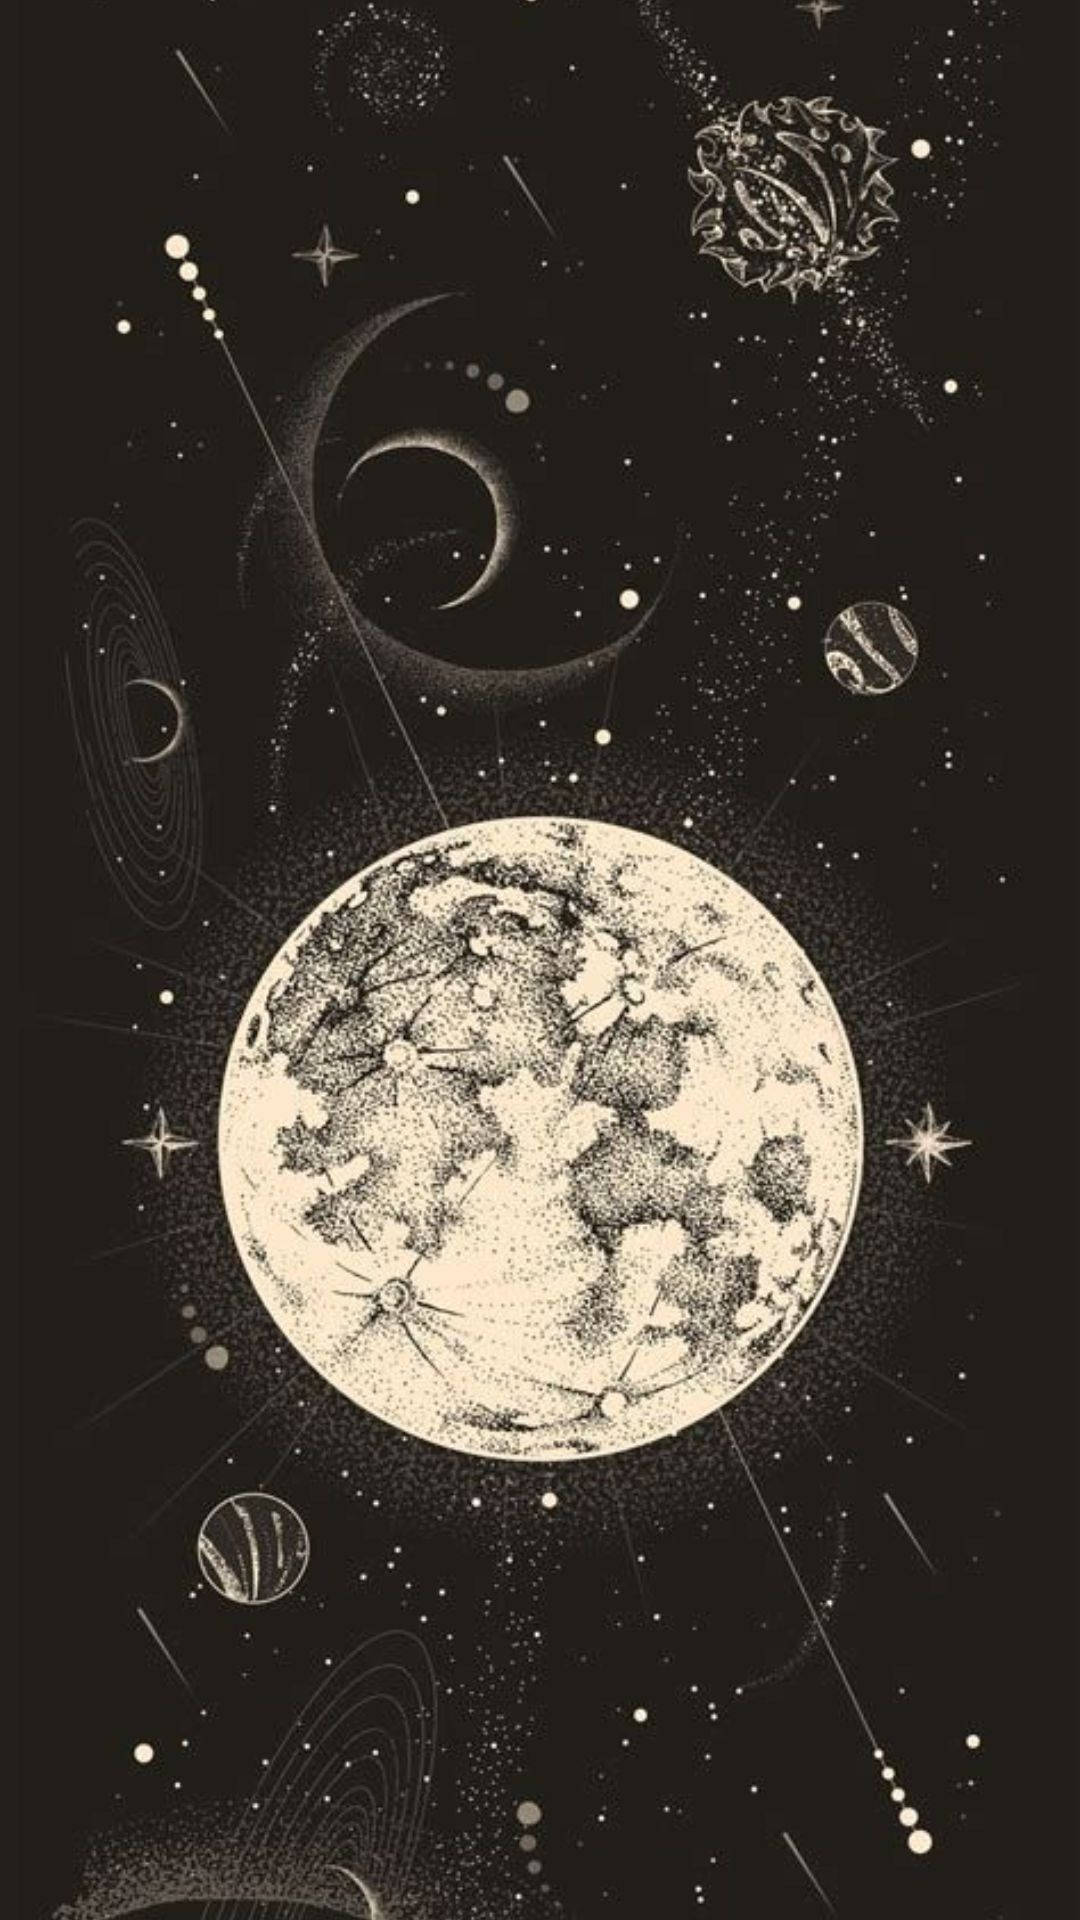 A poster of the moon and stars with planets - Planet, moon